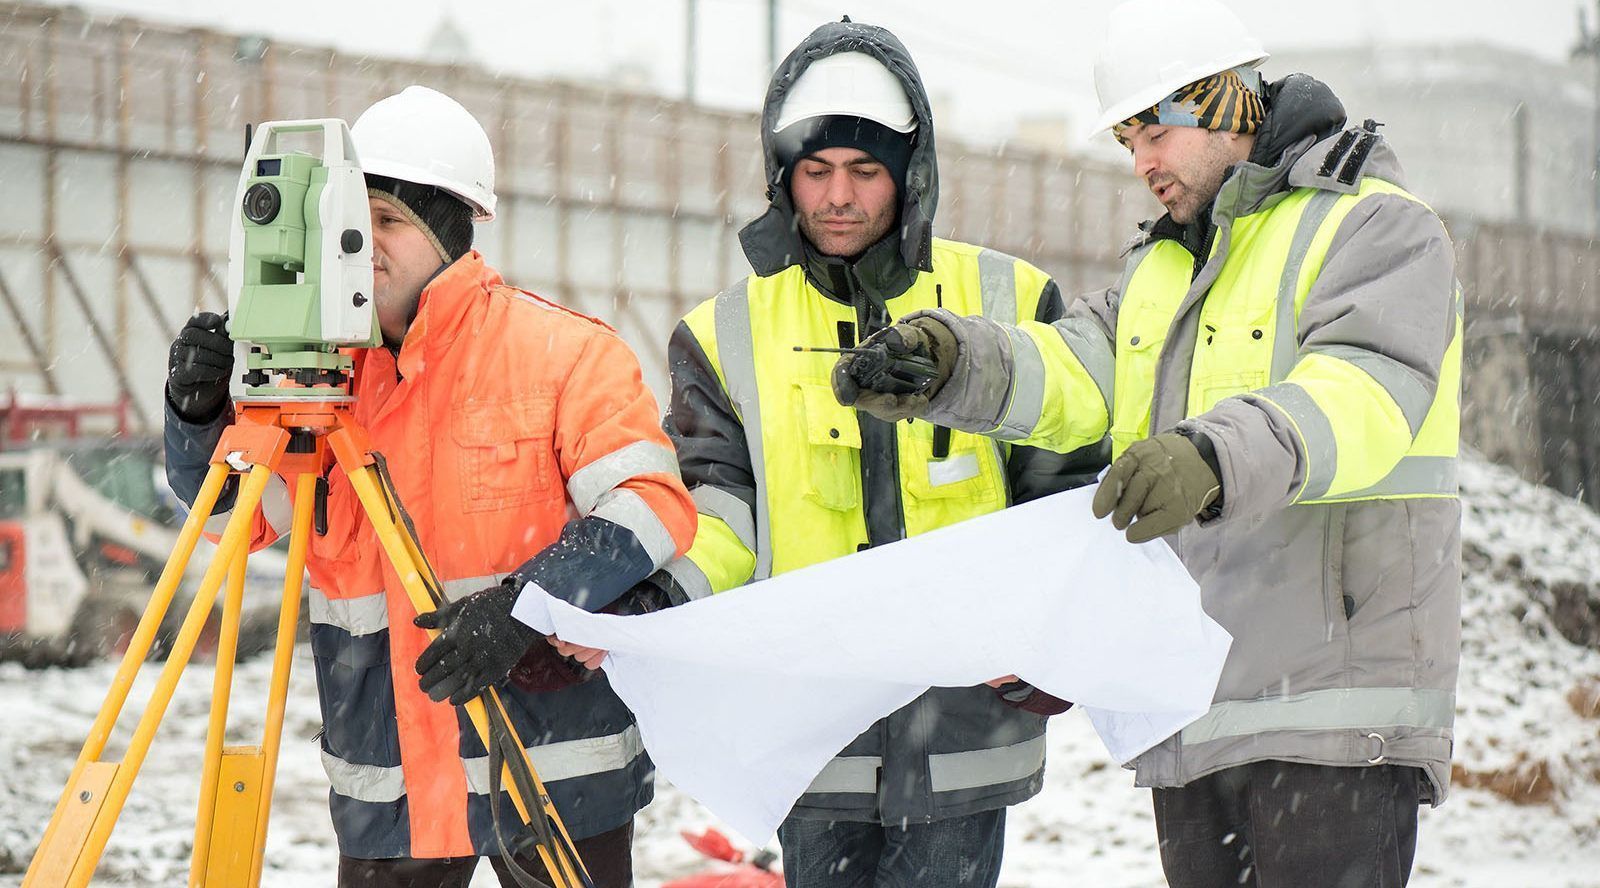 Construction Safety In The Winter - Tilt Wall Ontario